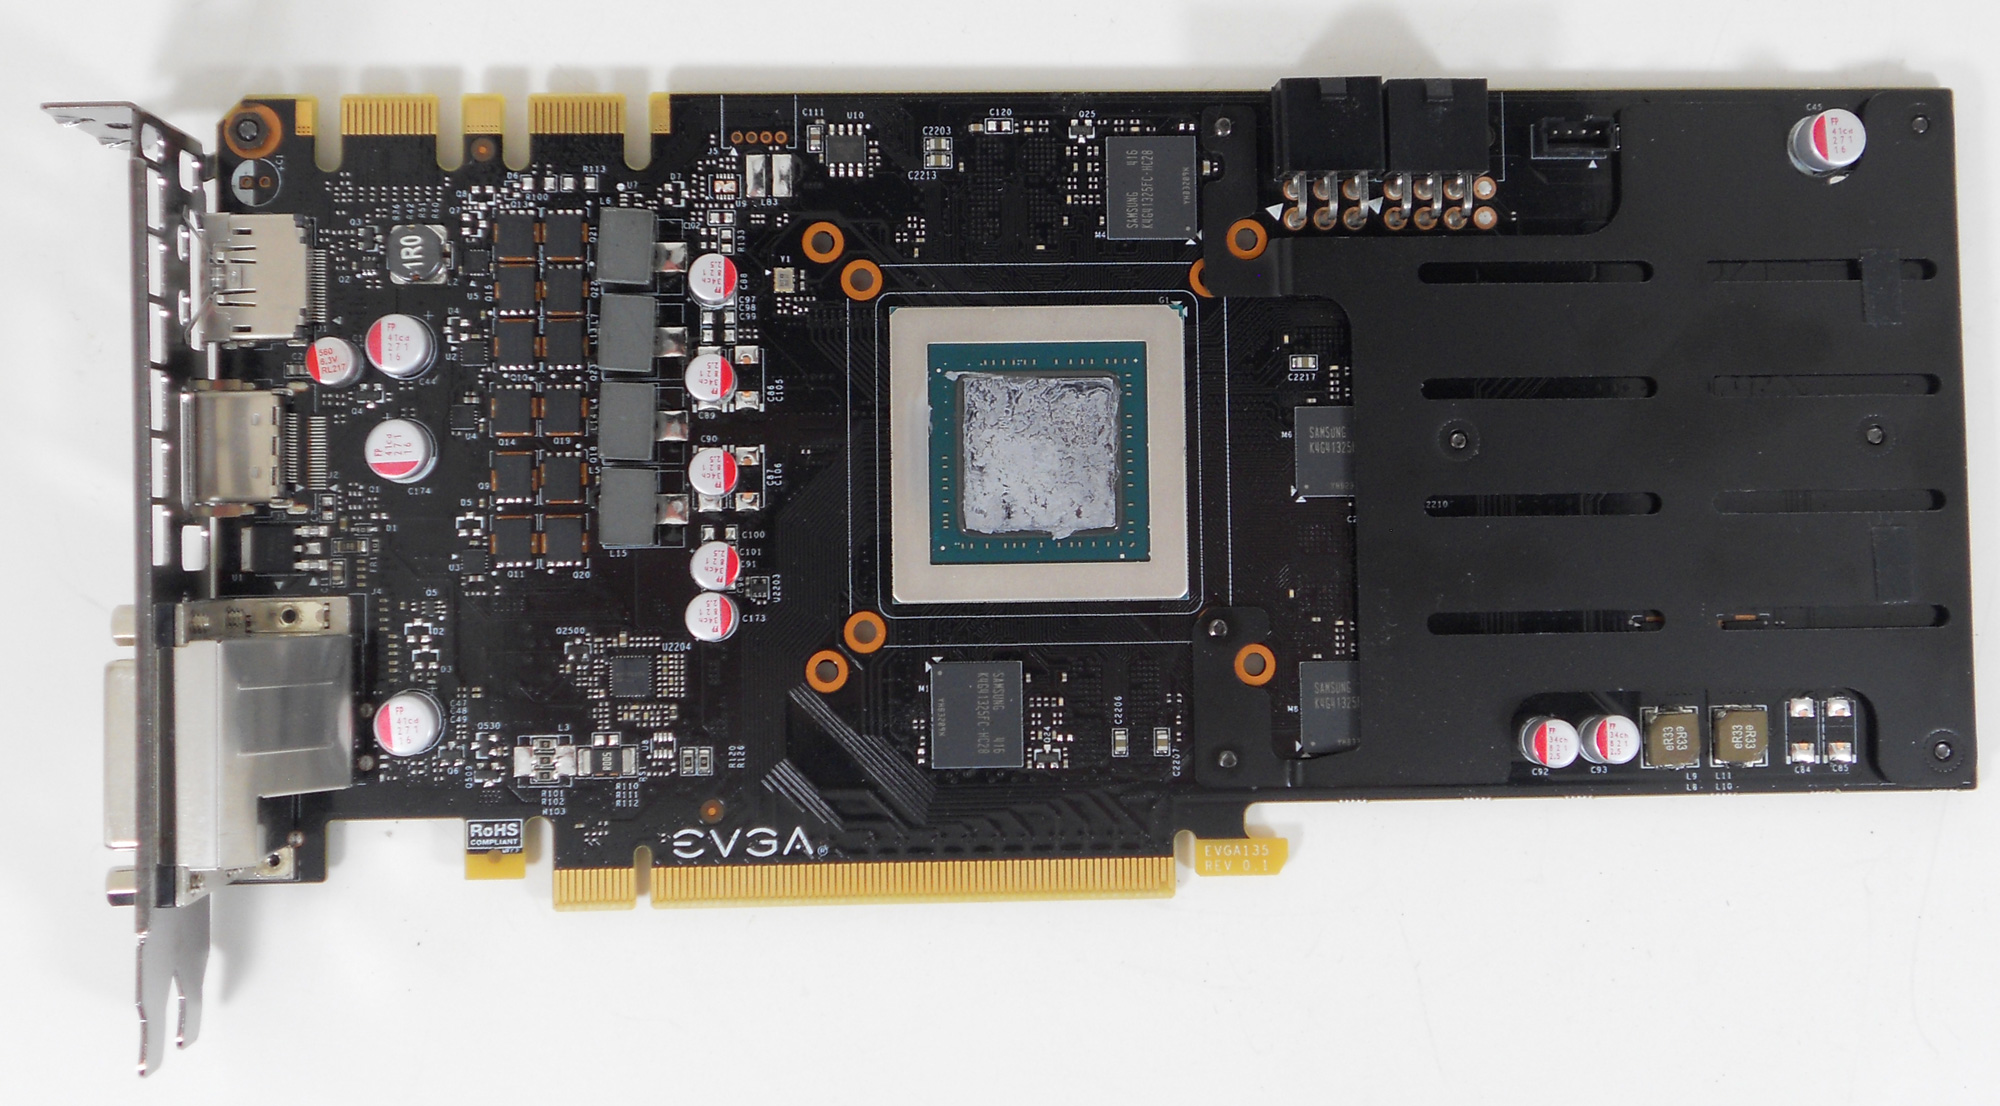 Meet The Evga Geforce Gtx 970 Ftw Acx 2 0 The Nvidia Geforce Gtx 970 Review Featuring Evga